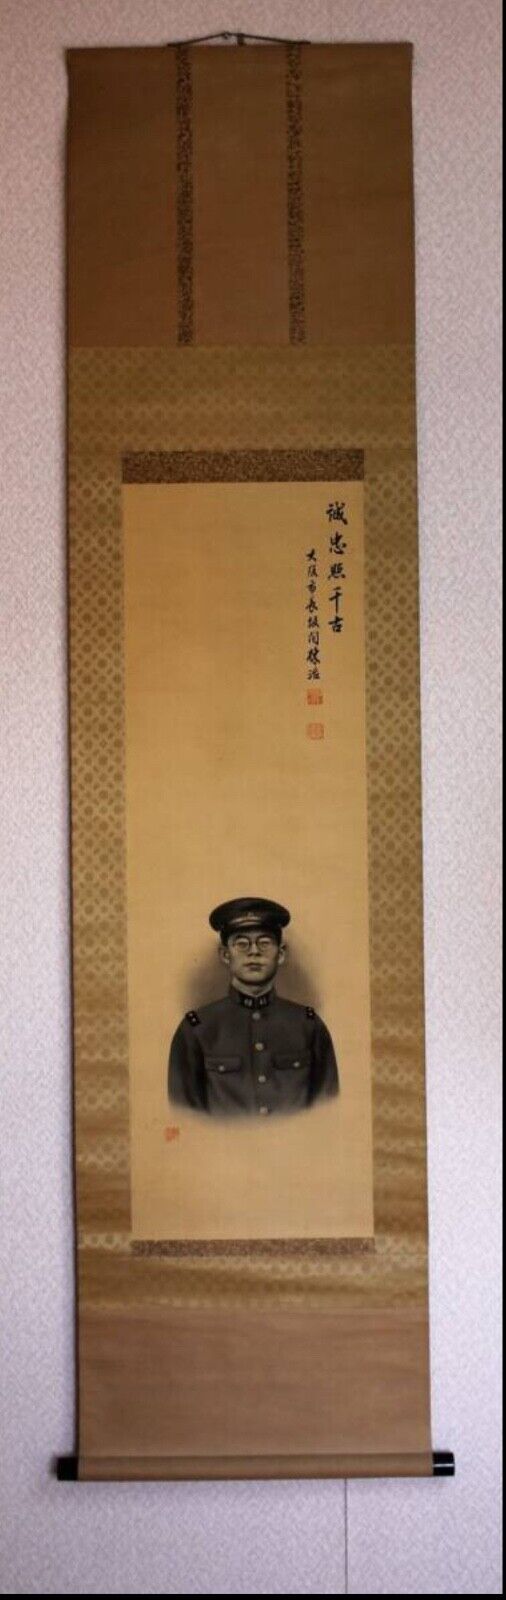 Antique Imperial Japanese Army Soldier\'s Commemorative Scroll, Early 1900s